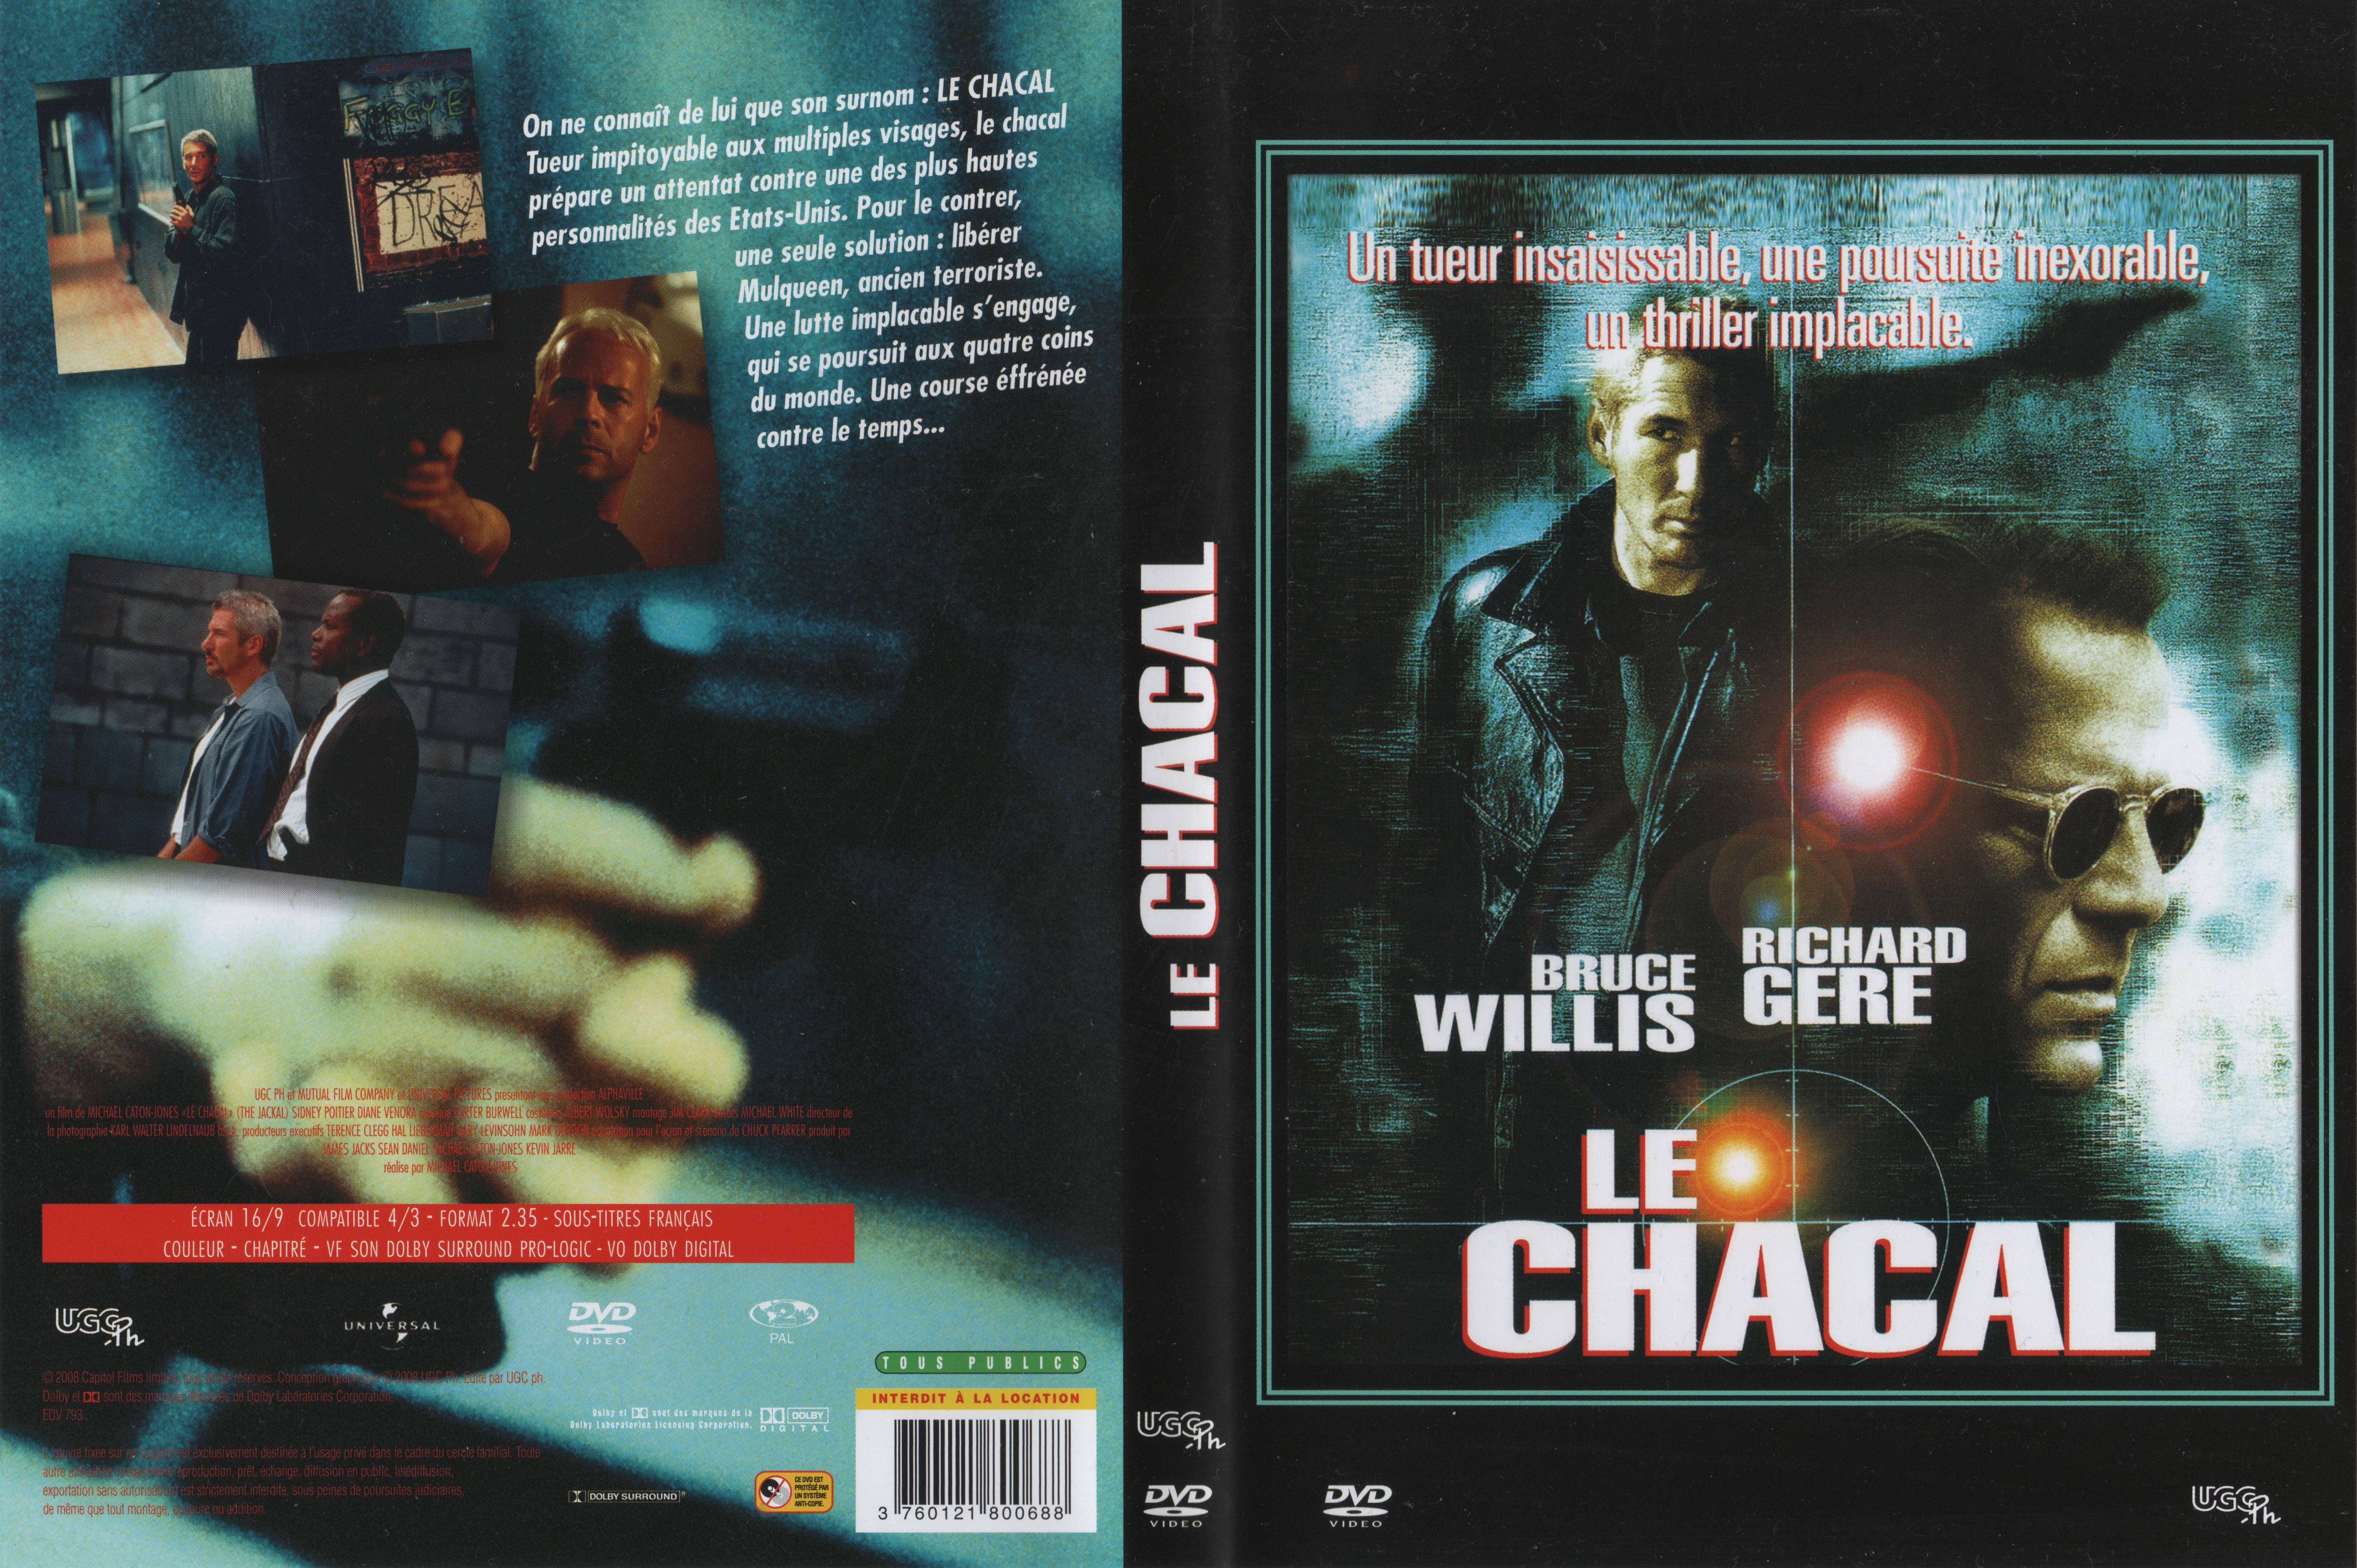 Jaquette DVD Le chacal v3